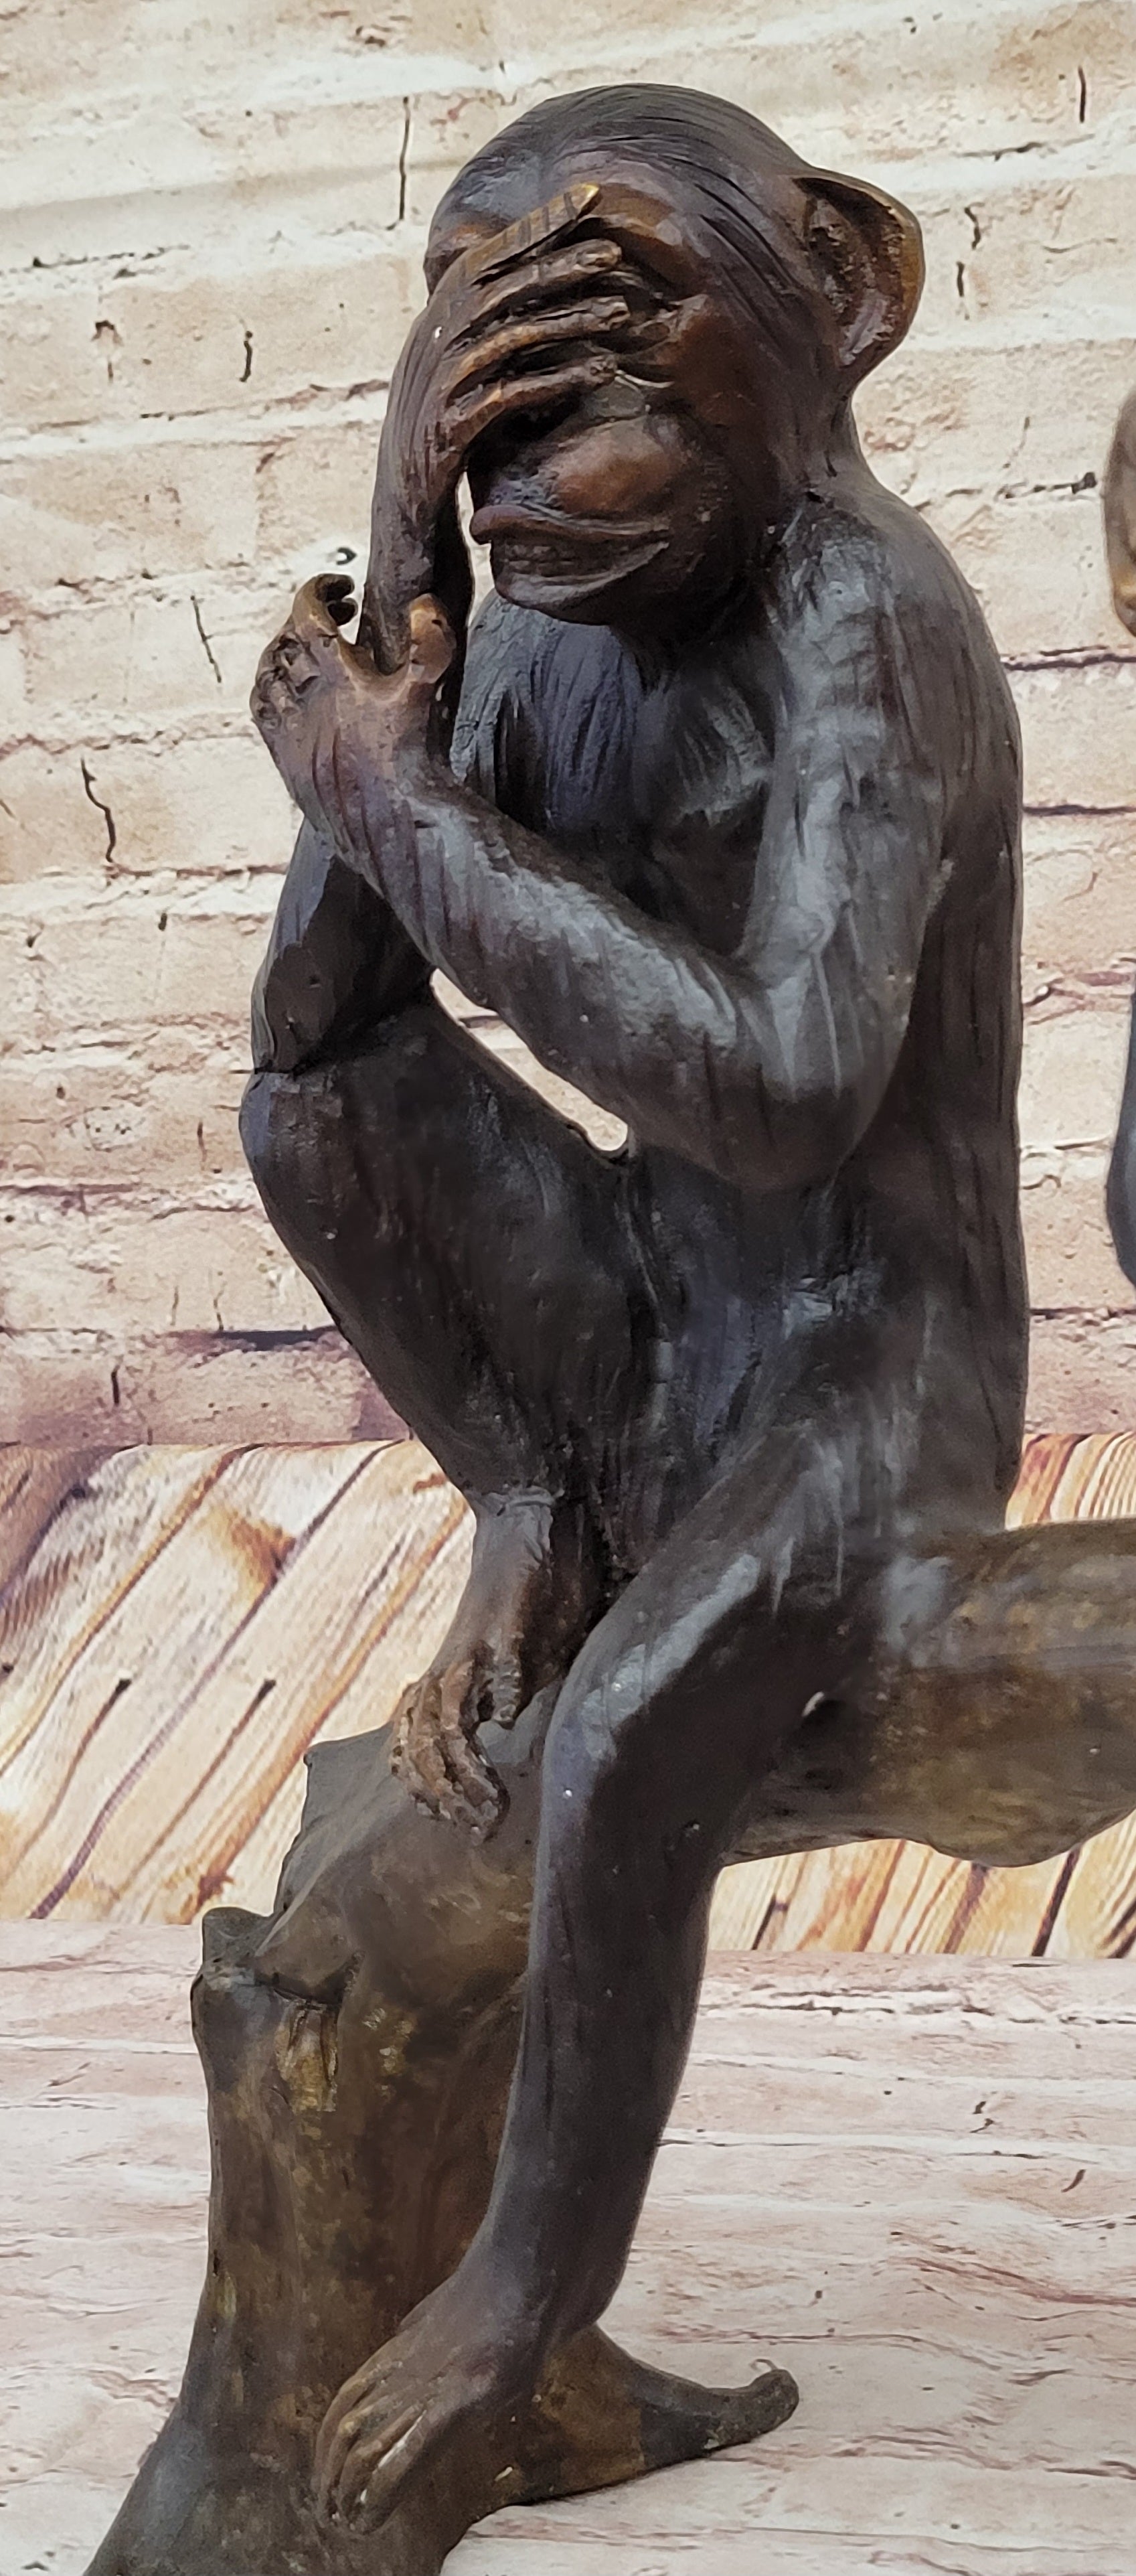 Limited Edition 3 Wise Monkey By Famous Artist Marius Bronze Sculpture Figurine